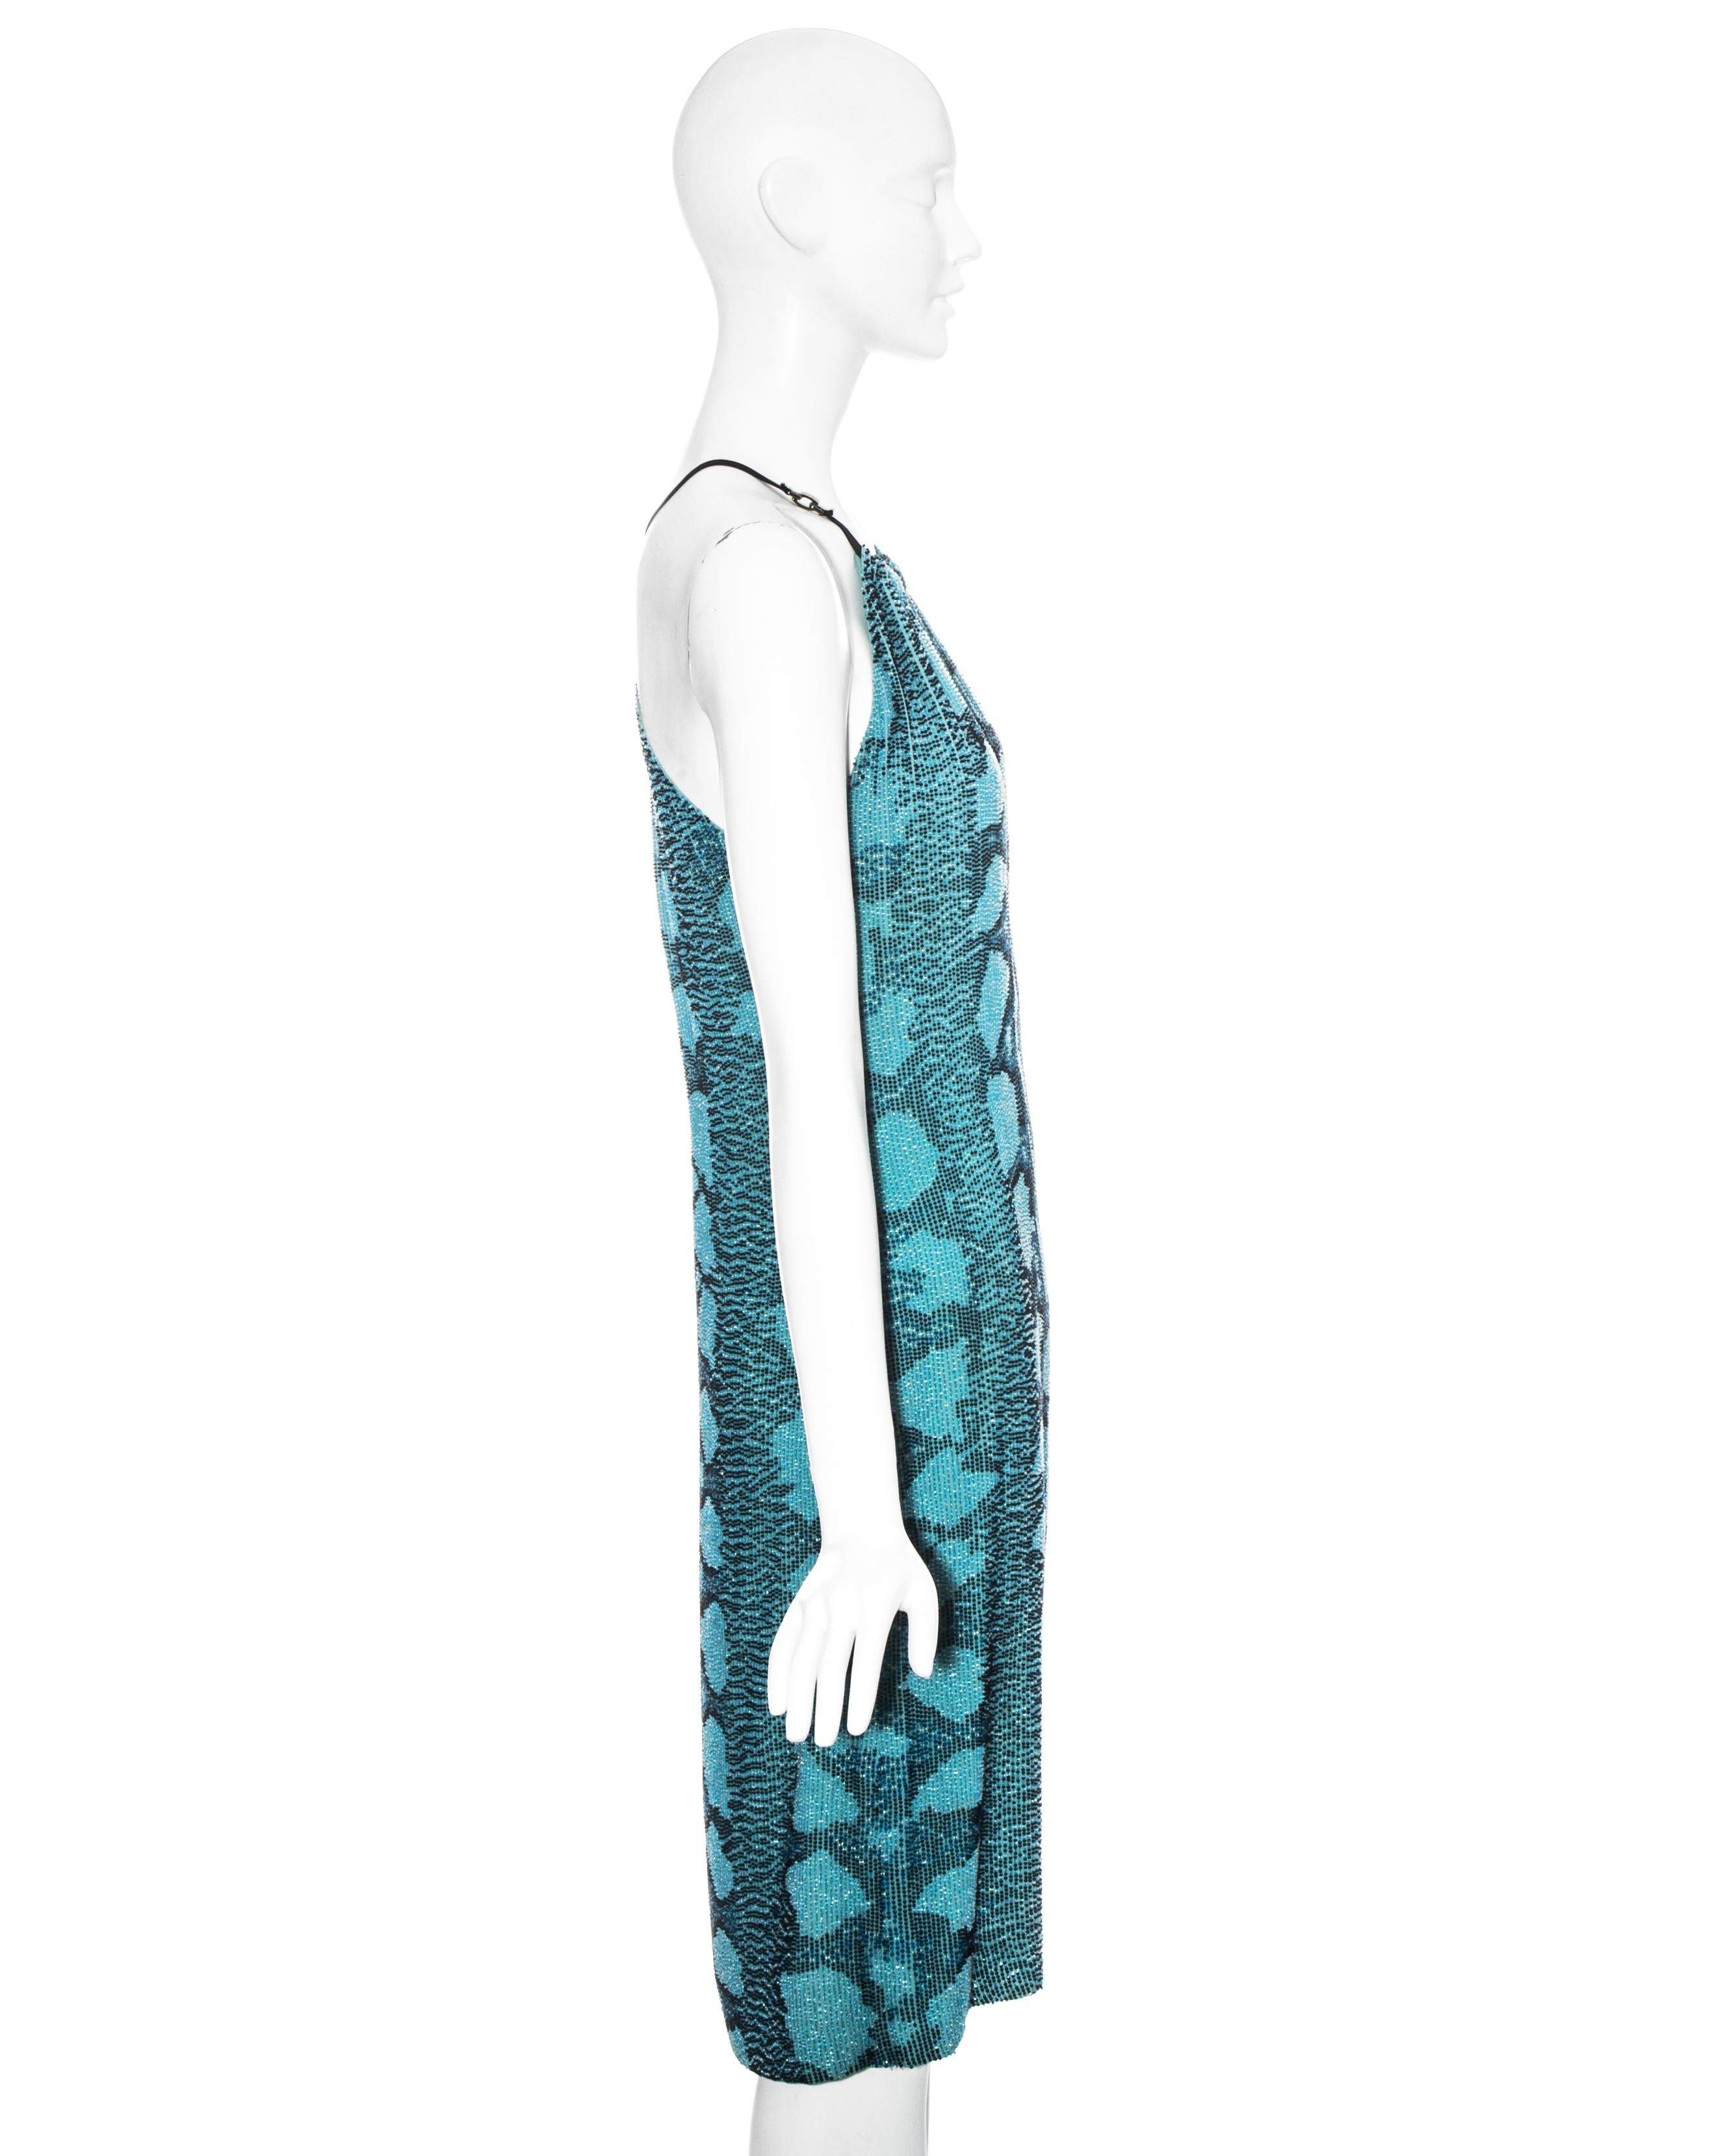 Gucci by Tom Ford aqua blue beaded evening dress, ss 2000 In Excellent Condition For Sale In London, GB